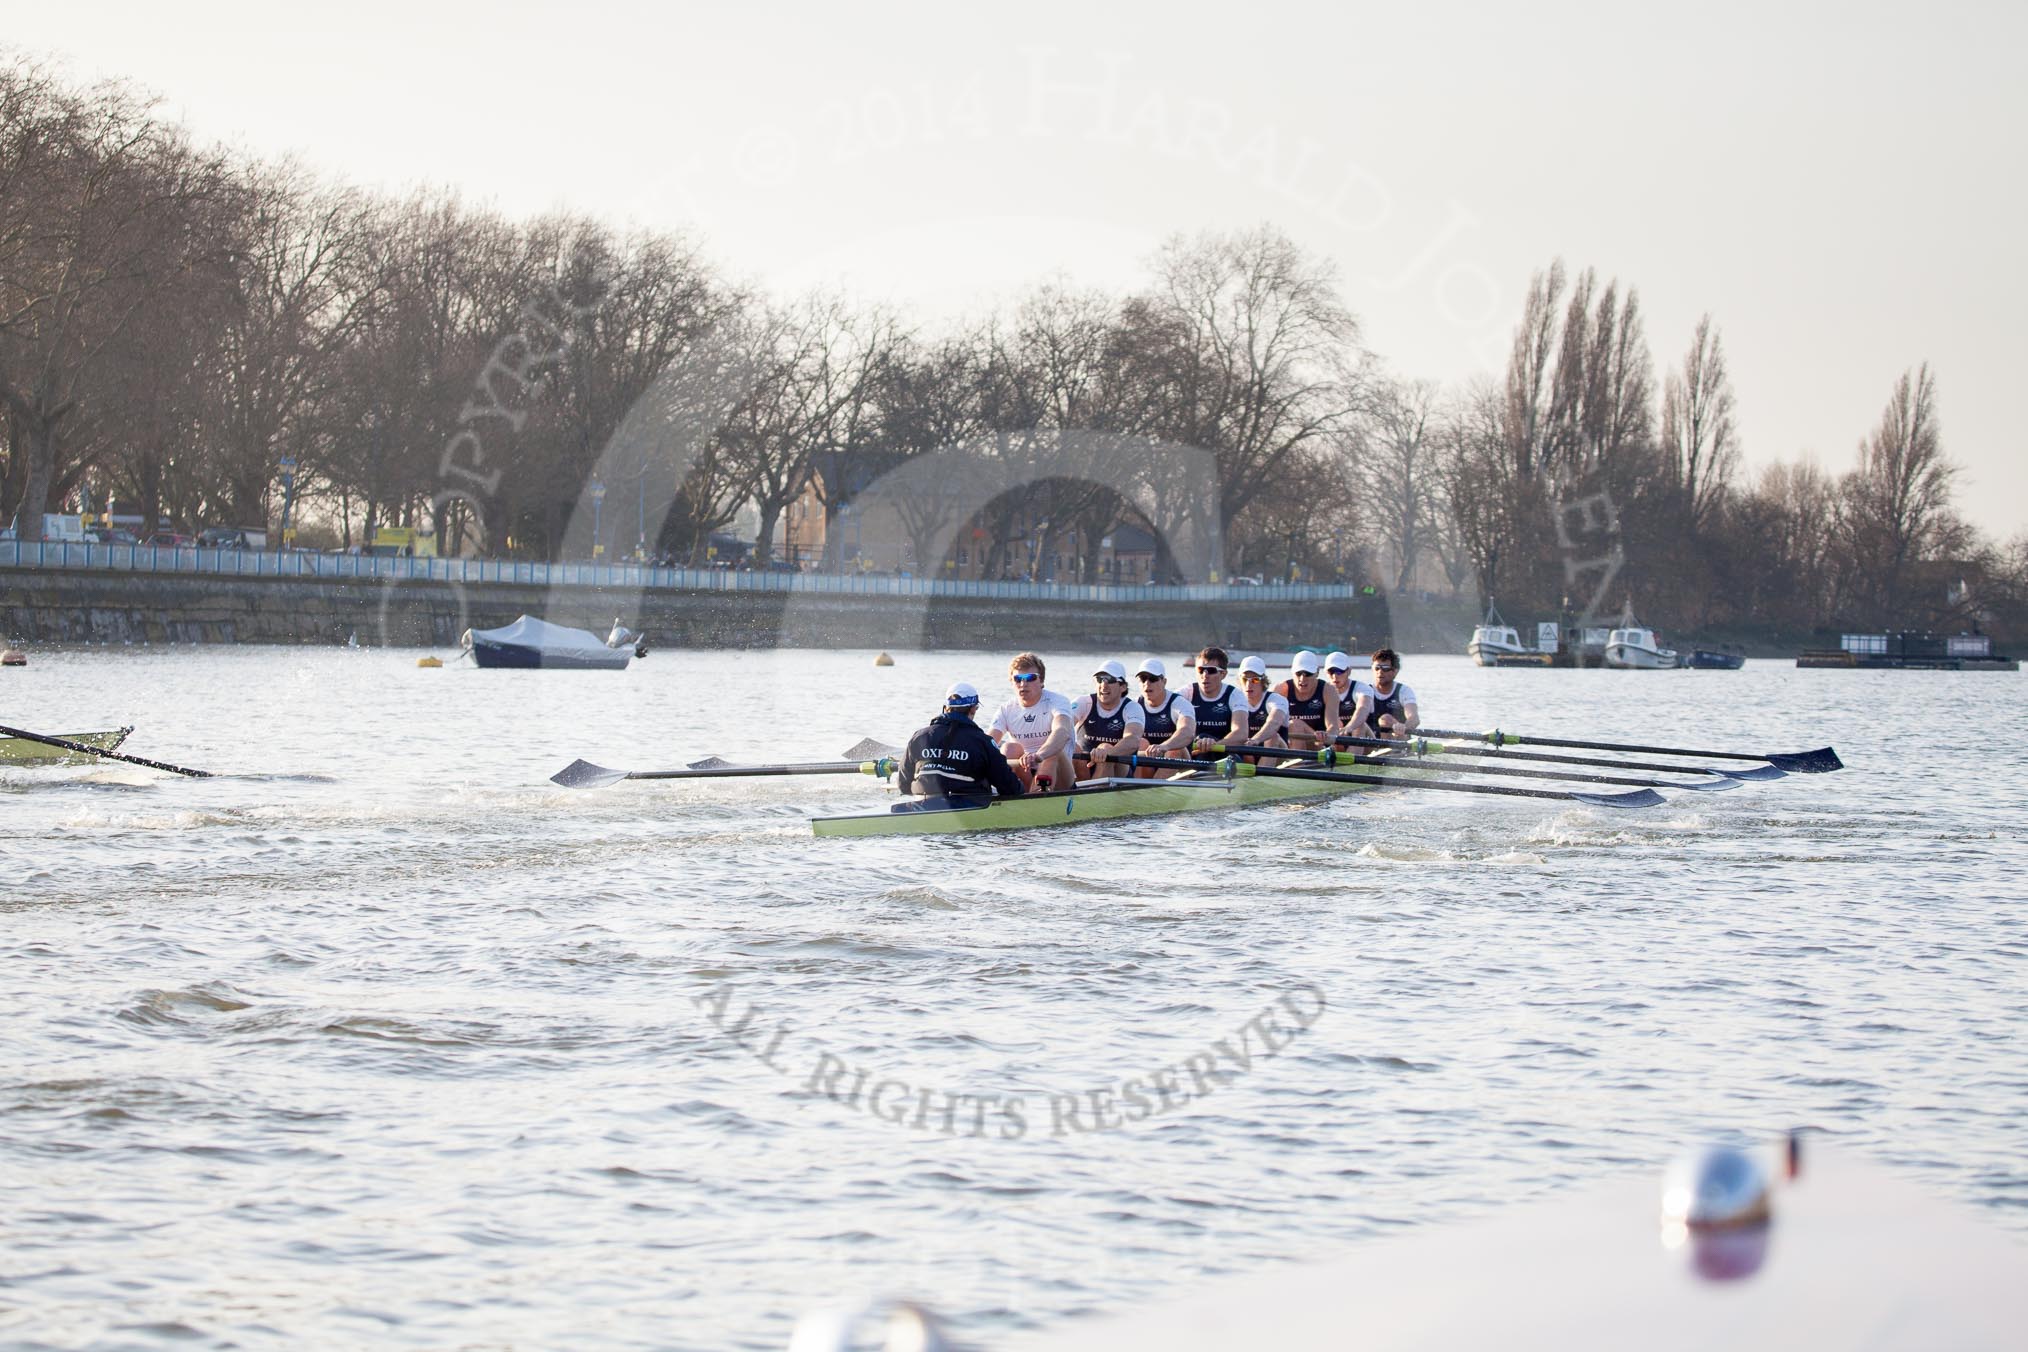 The Boat Race season 2014 - fixture OUBC vs German U23: The OUBC boat in the lead, the German U23 boat on the left at the Putney boat houses..
River Thames between Putney Bridge and Chiswick Bridge,



on 08 March 2014 at 16:46, image #55